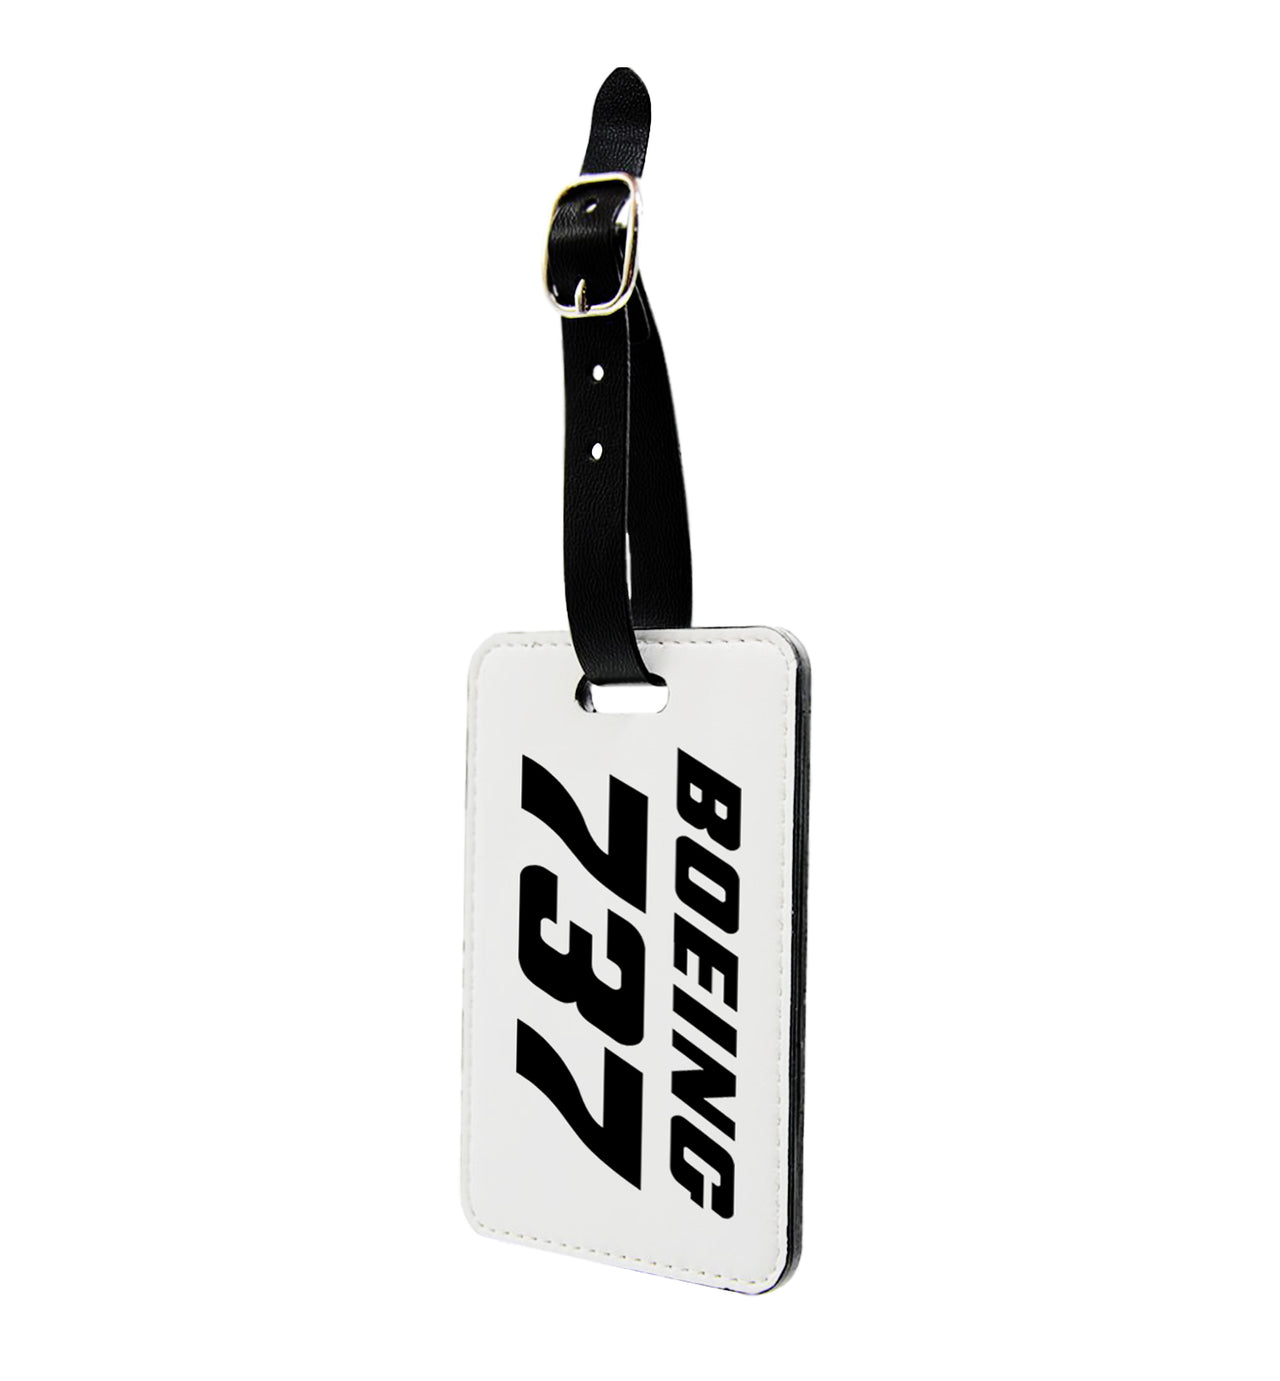 Boeing 737 & Text Designed Luggage Tag